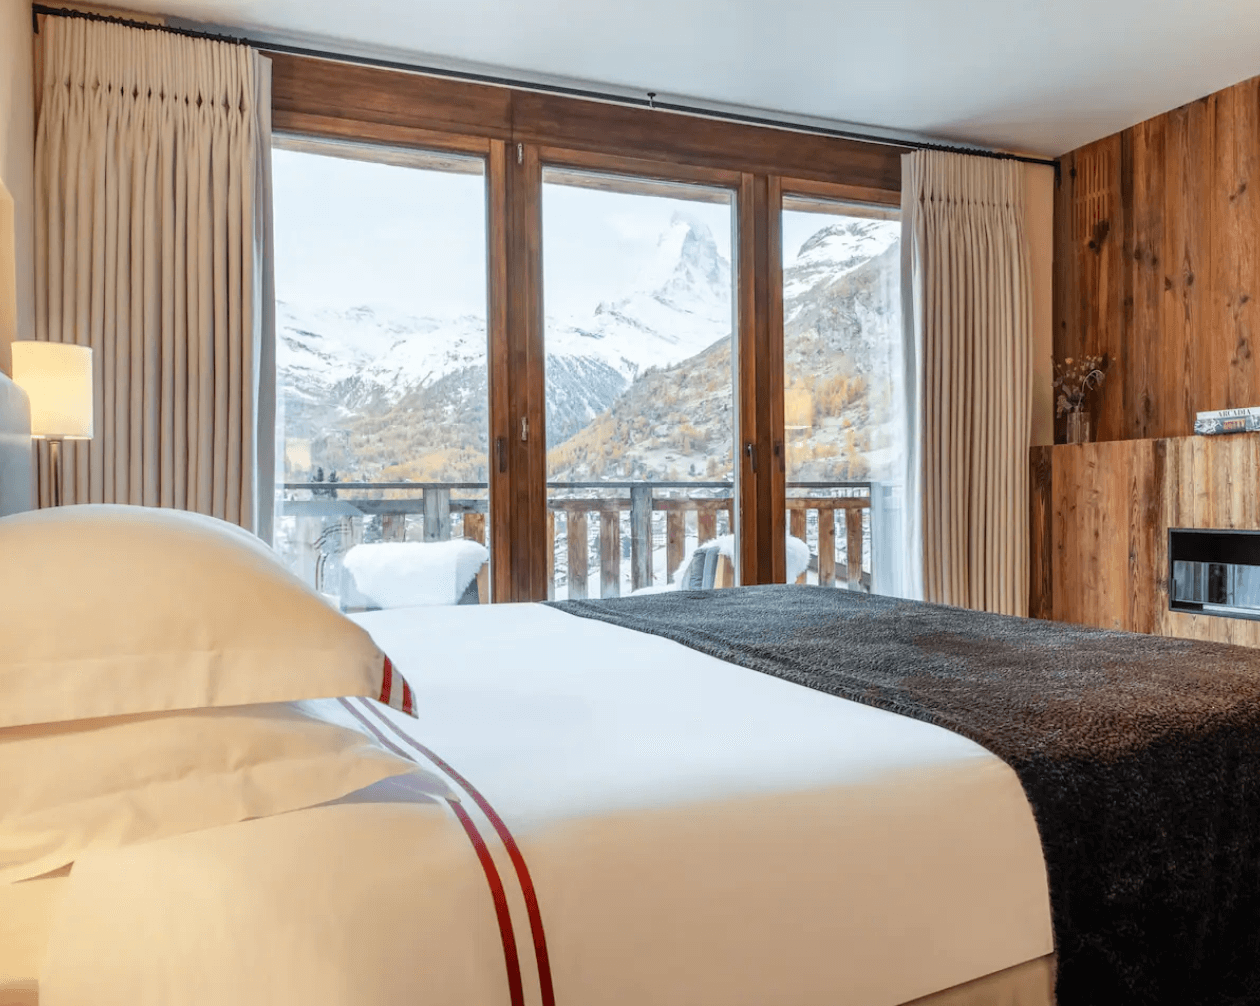 One of the bedrooms in the chalet with a view of the Matterhorn